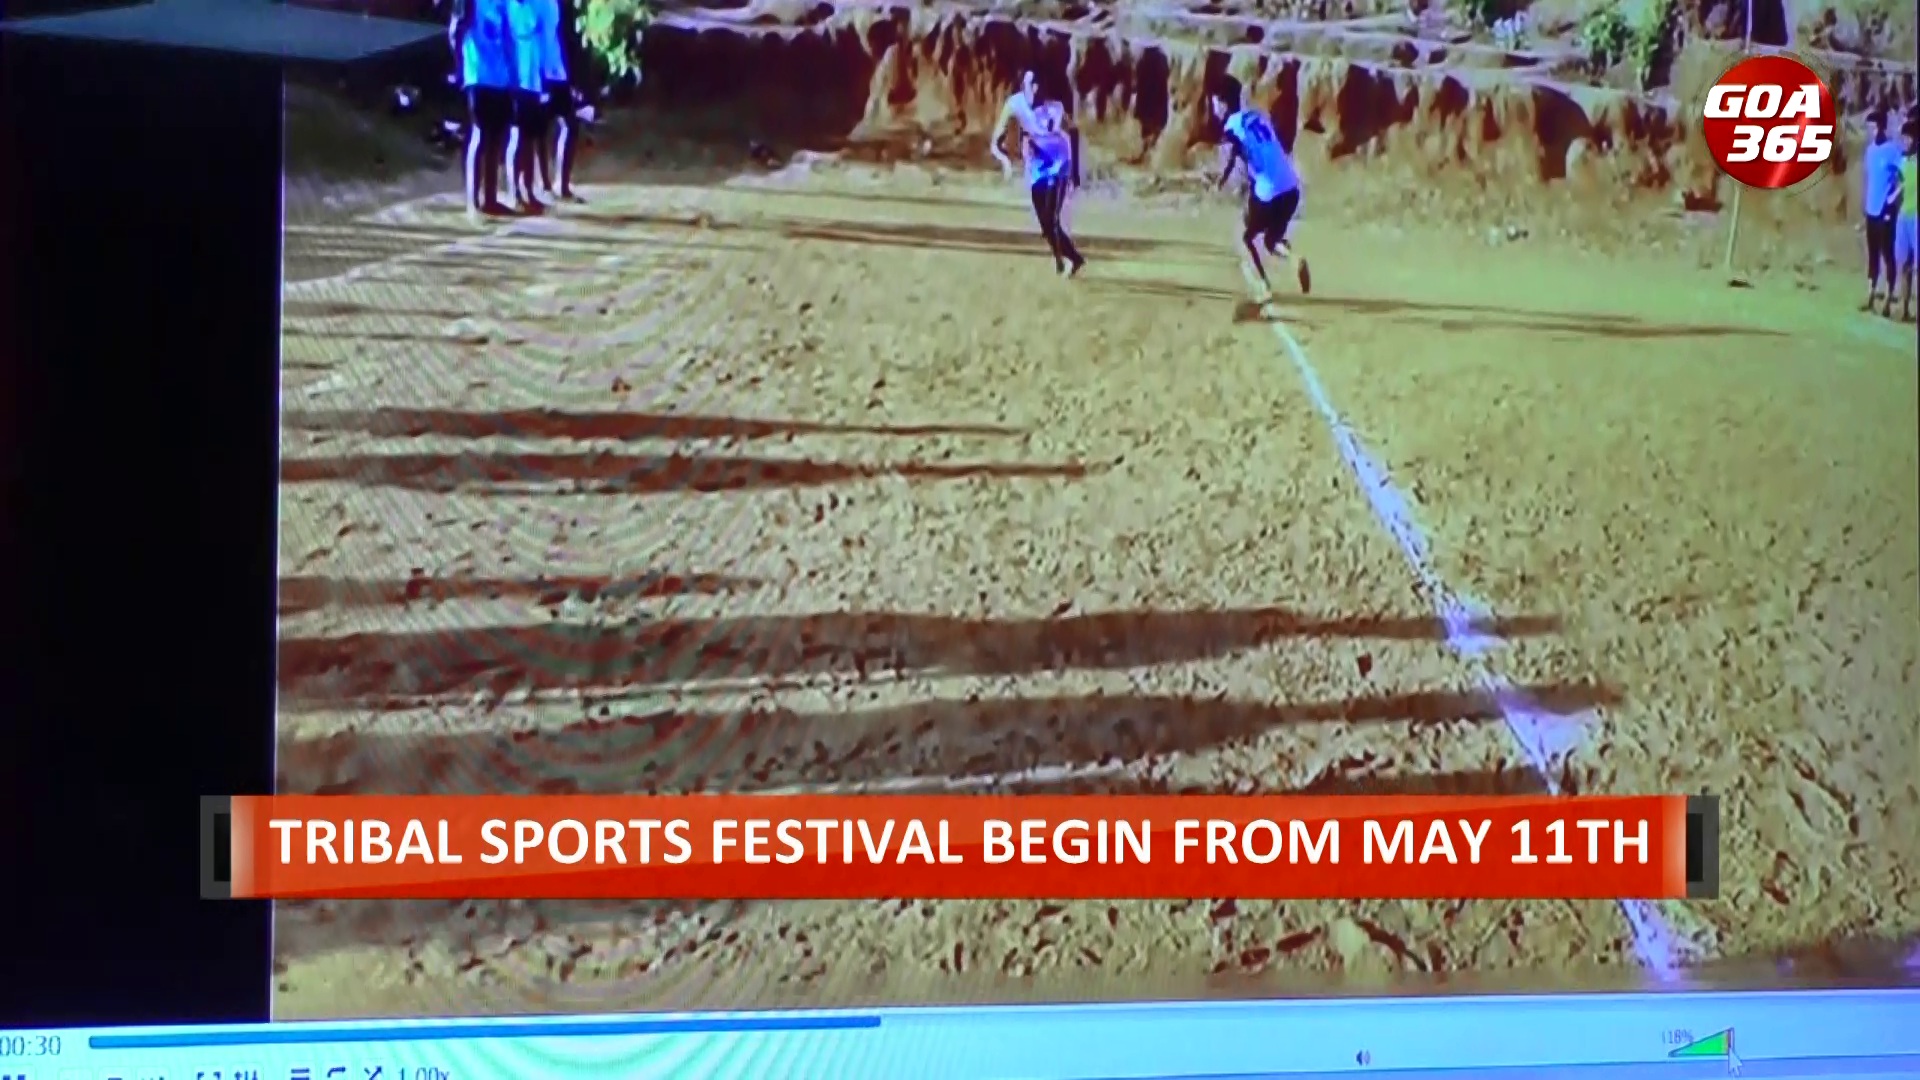 SAG to organise Tribal Sports Festival starting May 11th  